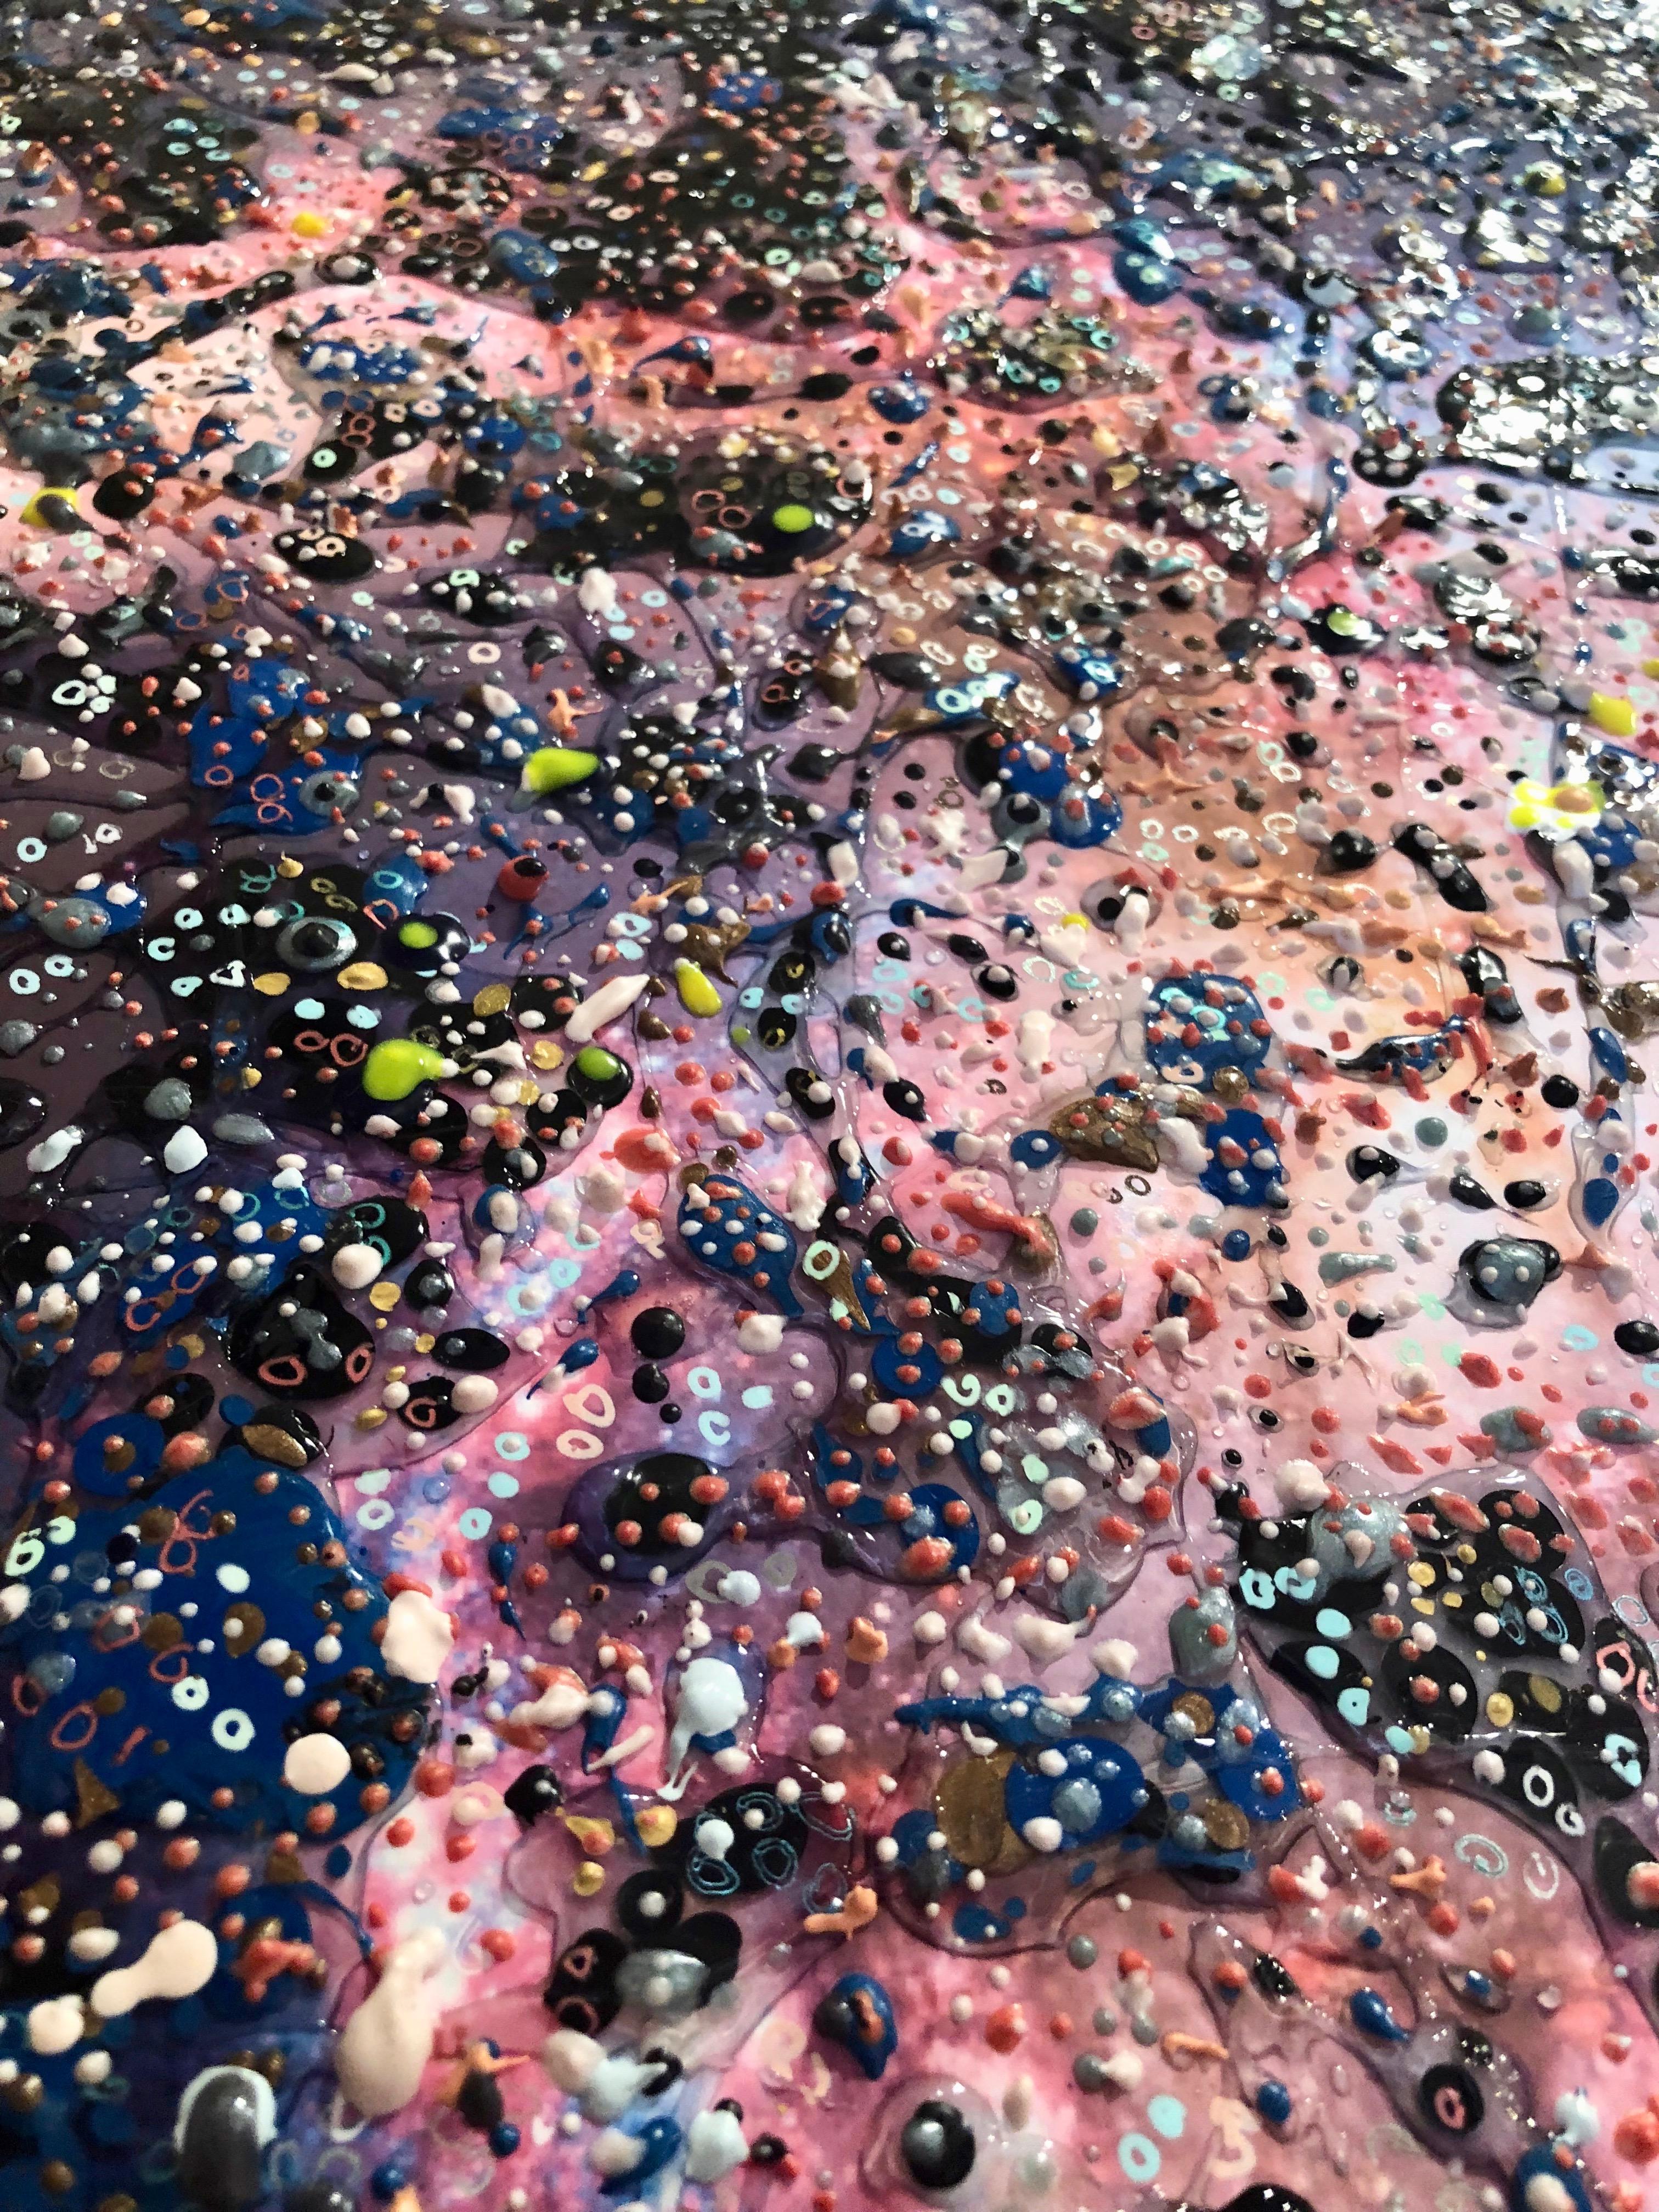 Space pinks, blues and black suggests a cosmic explosion, inspired by Hubble telescope’s images of the birth of galaxies.The artist draws on biological patterns on the cellular level and geological patterns of earth's terrain. Exploring